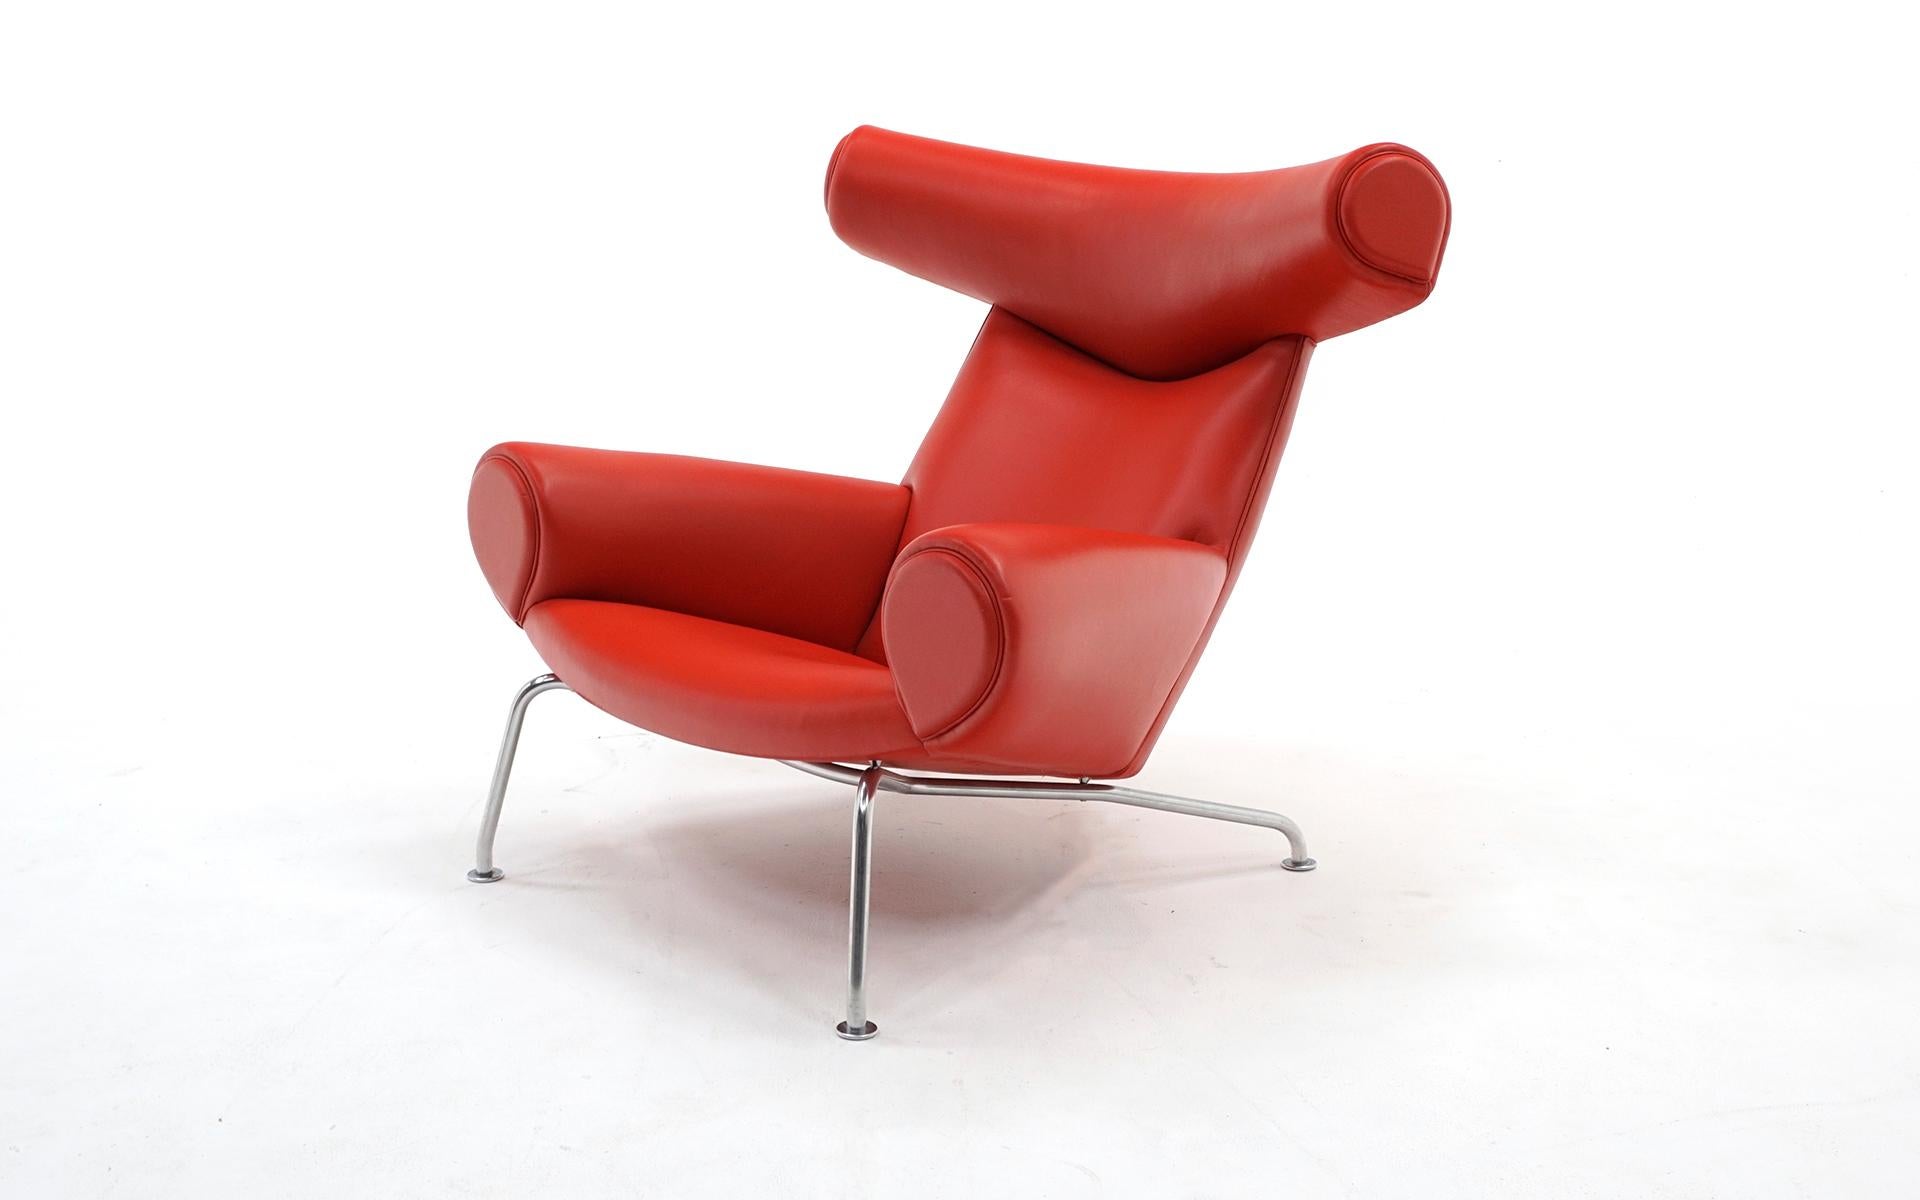 Mid-20th Century Hans Wegner Ox Lounge Chair, Model No. AP-46, New Red Leather, Excellent